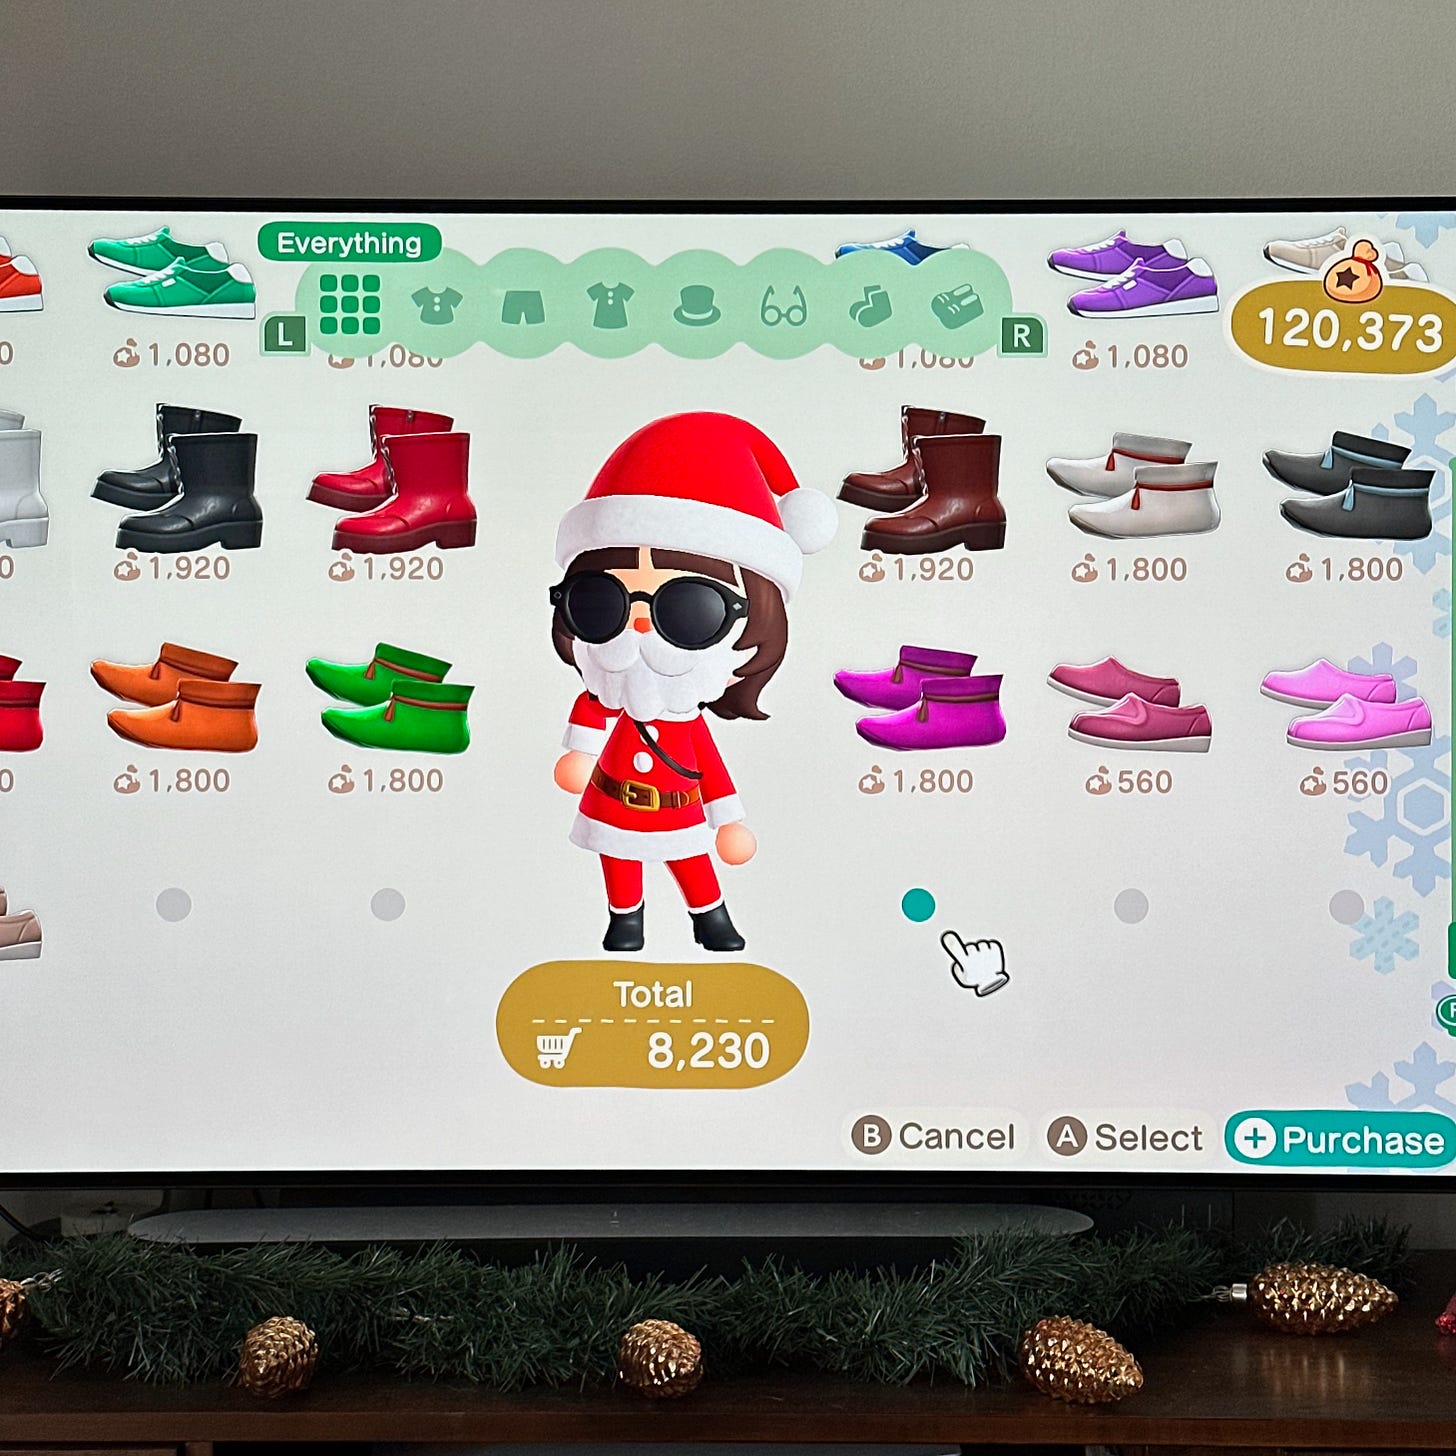 Photo of television set showing Animal Crossing New Horizons dressing room with character dressed as Santa